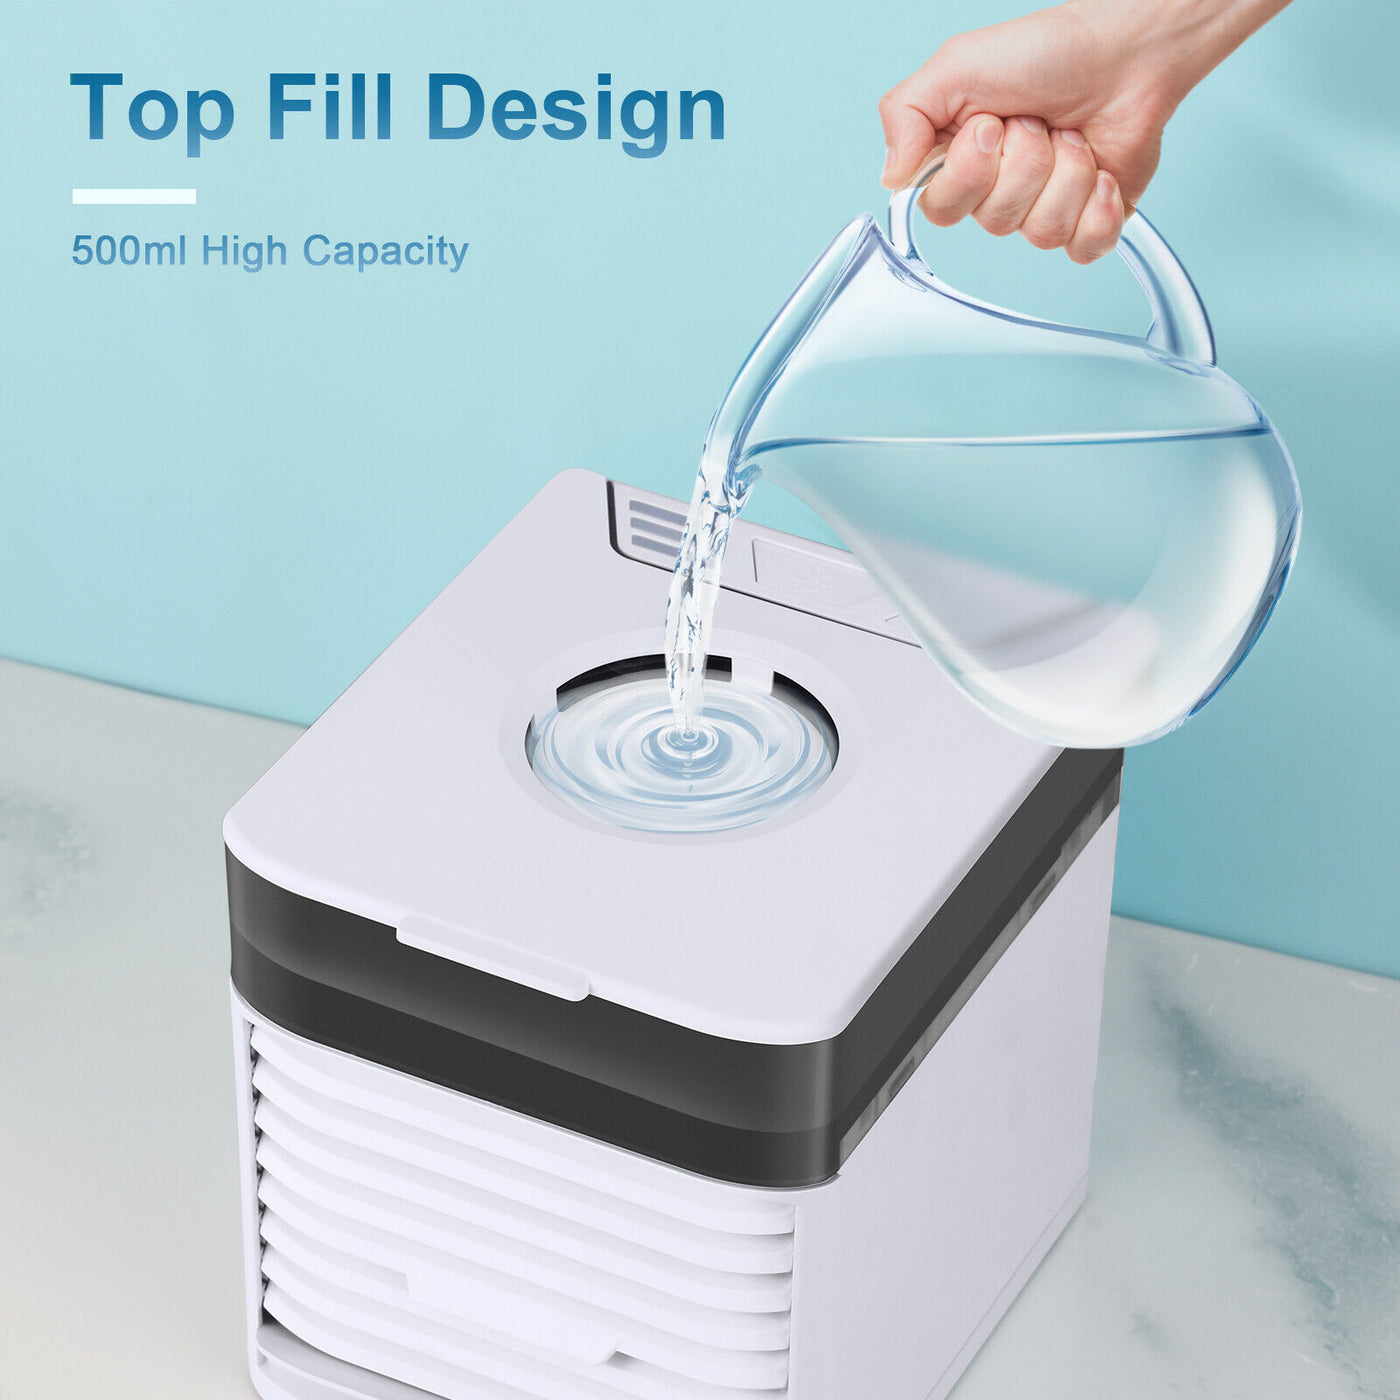 4 In 1 Personal Portable Cooler AC Air Conditioner Unit Air Fan Humidifier 4 In 1 Upgraded Portable Air Conditioner Cooling Fan 3 Speed Home Office Tent - My Tech Addict